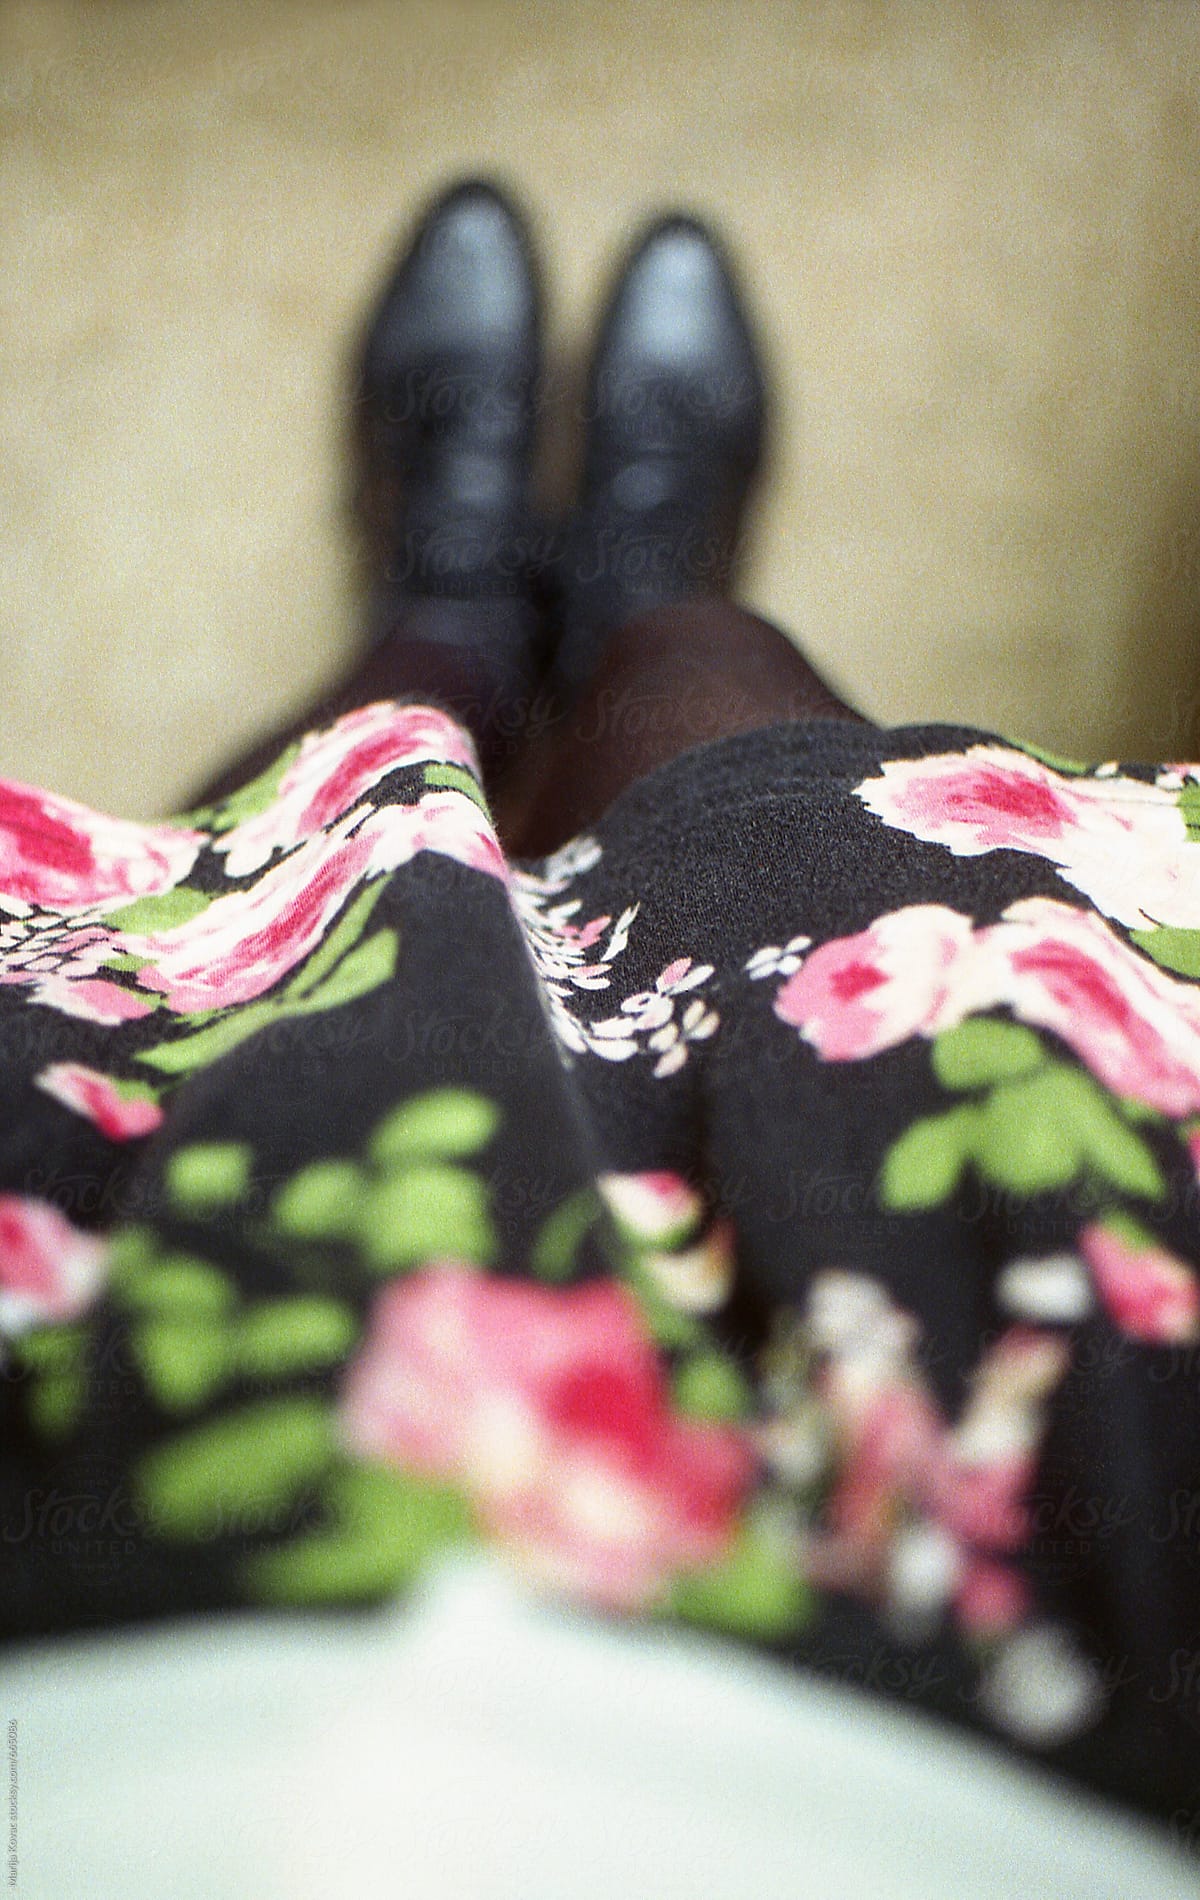 Girl in a floral skirt - from above